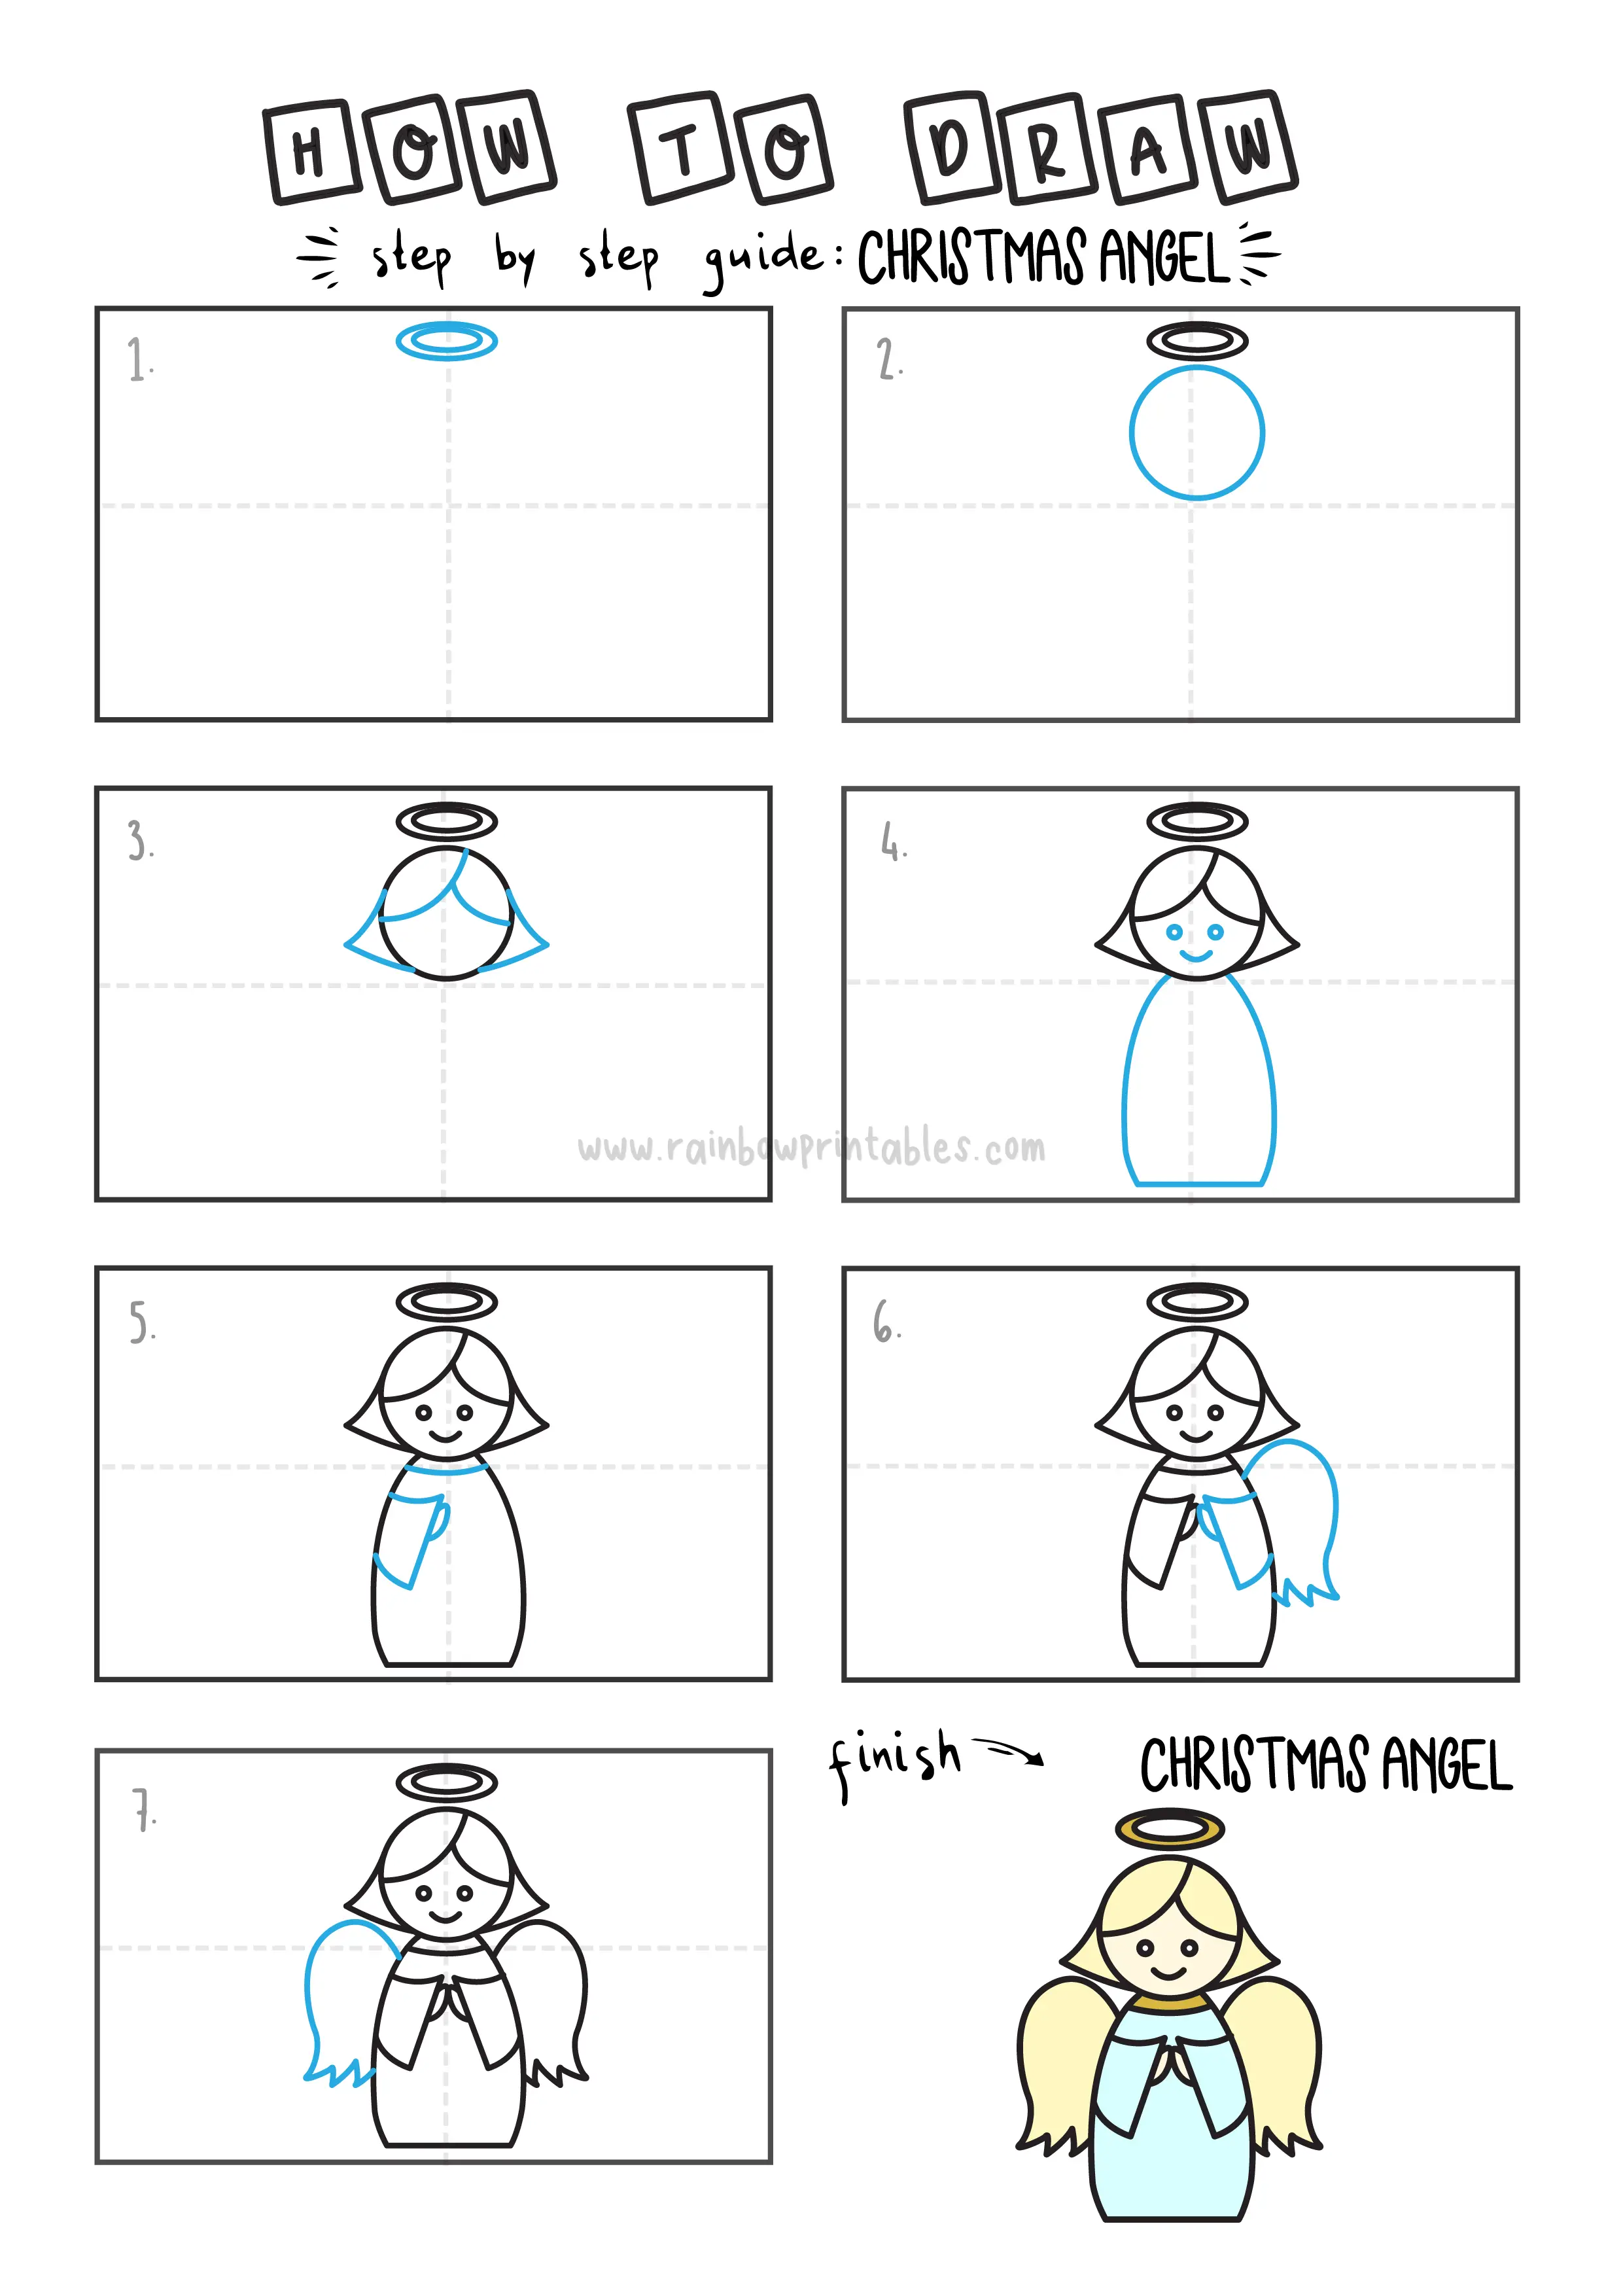 How To Draw a Christmas Angel Step By Step Easy Simple Drawing Guide for Kids